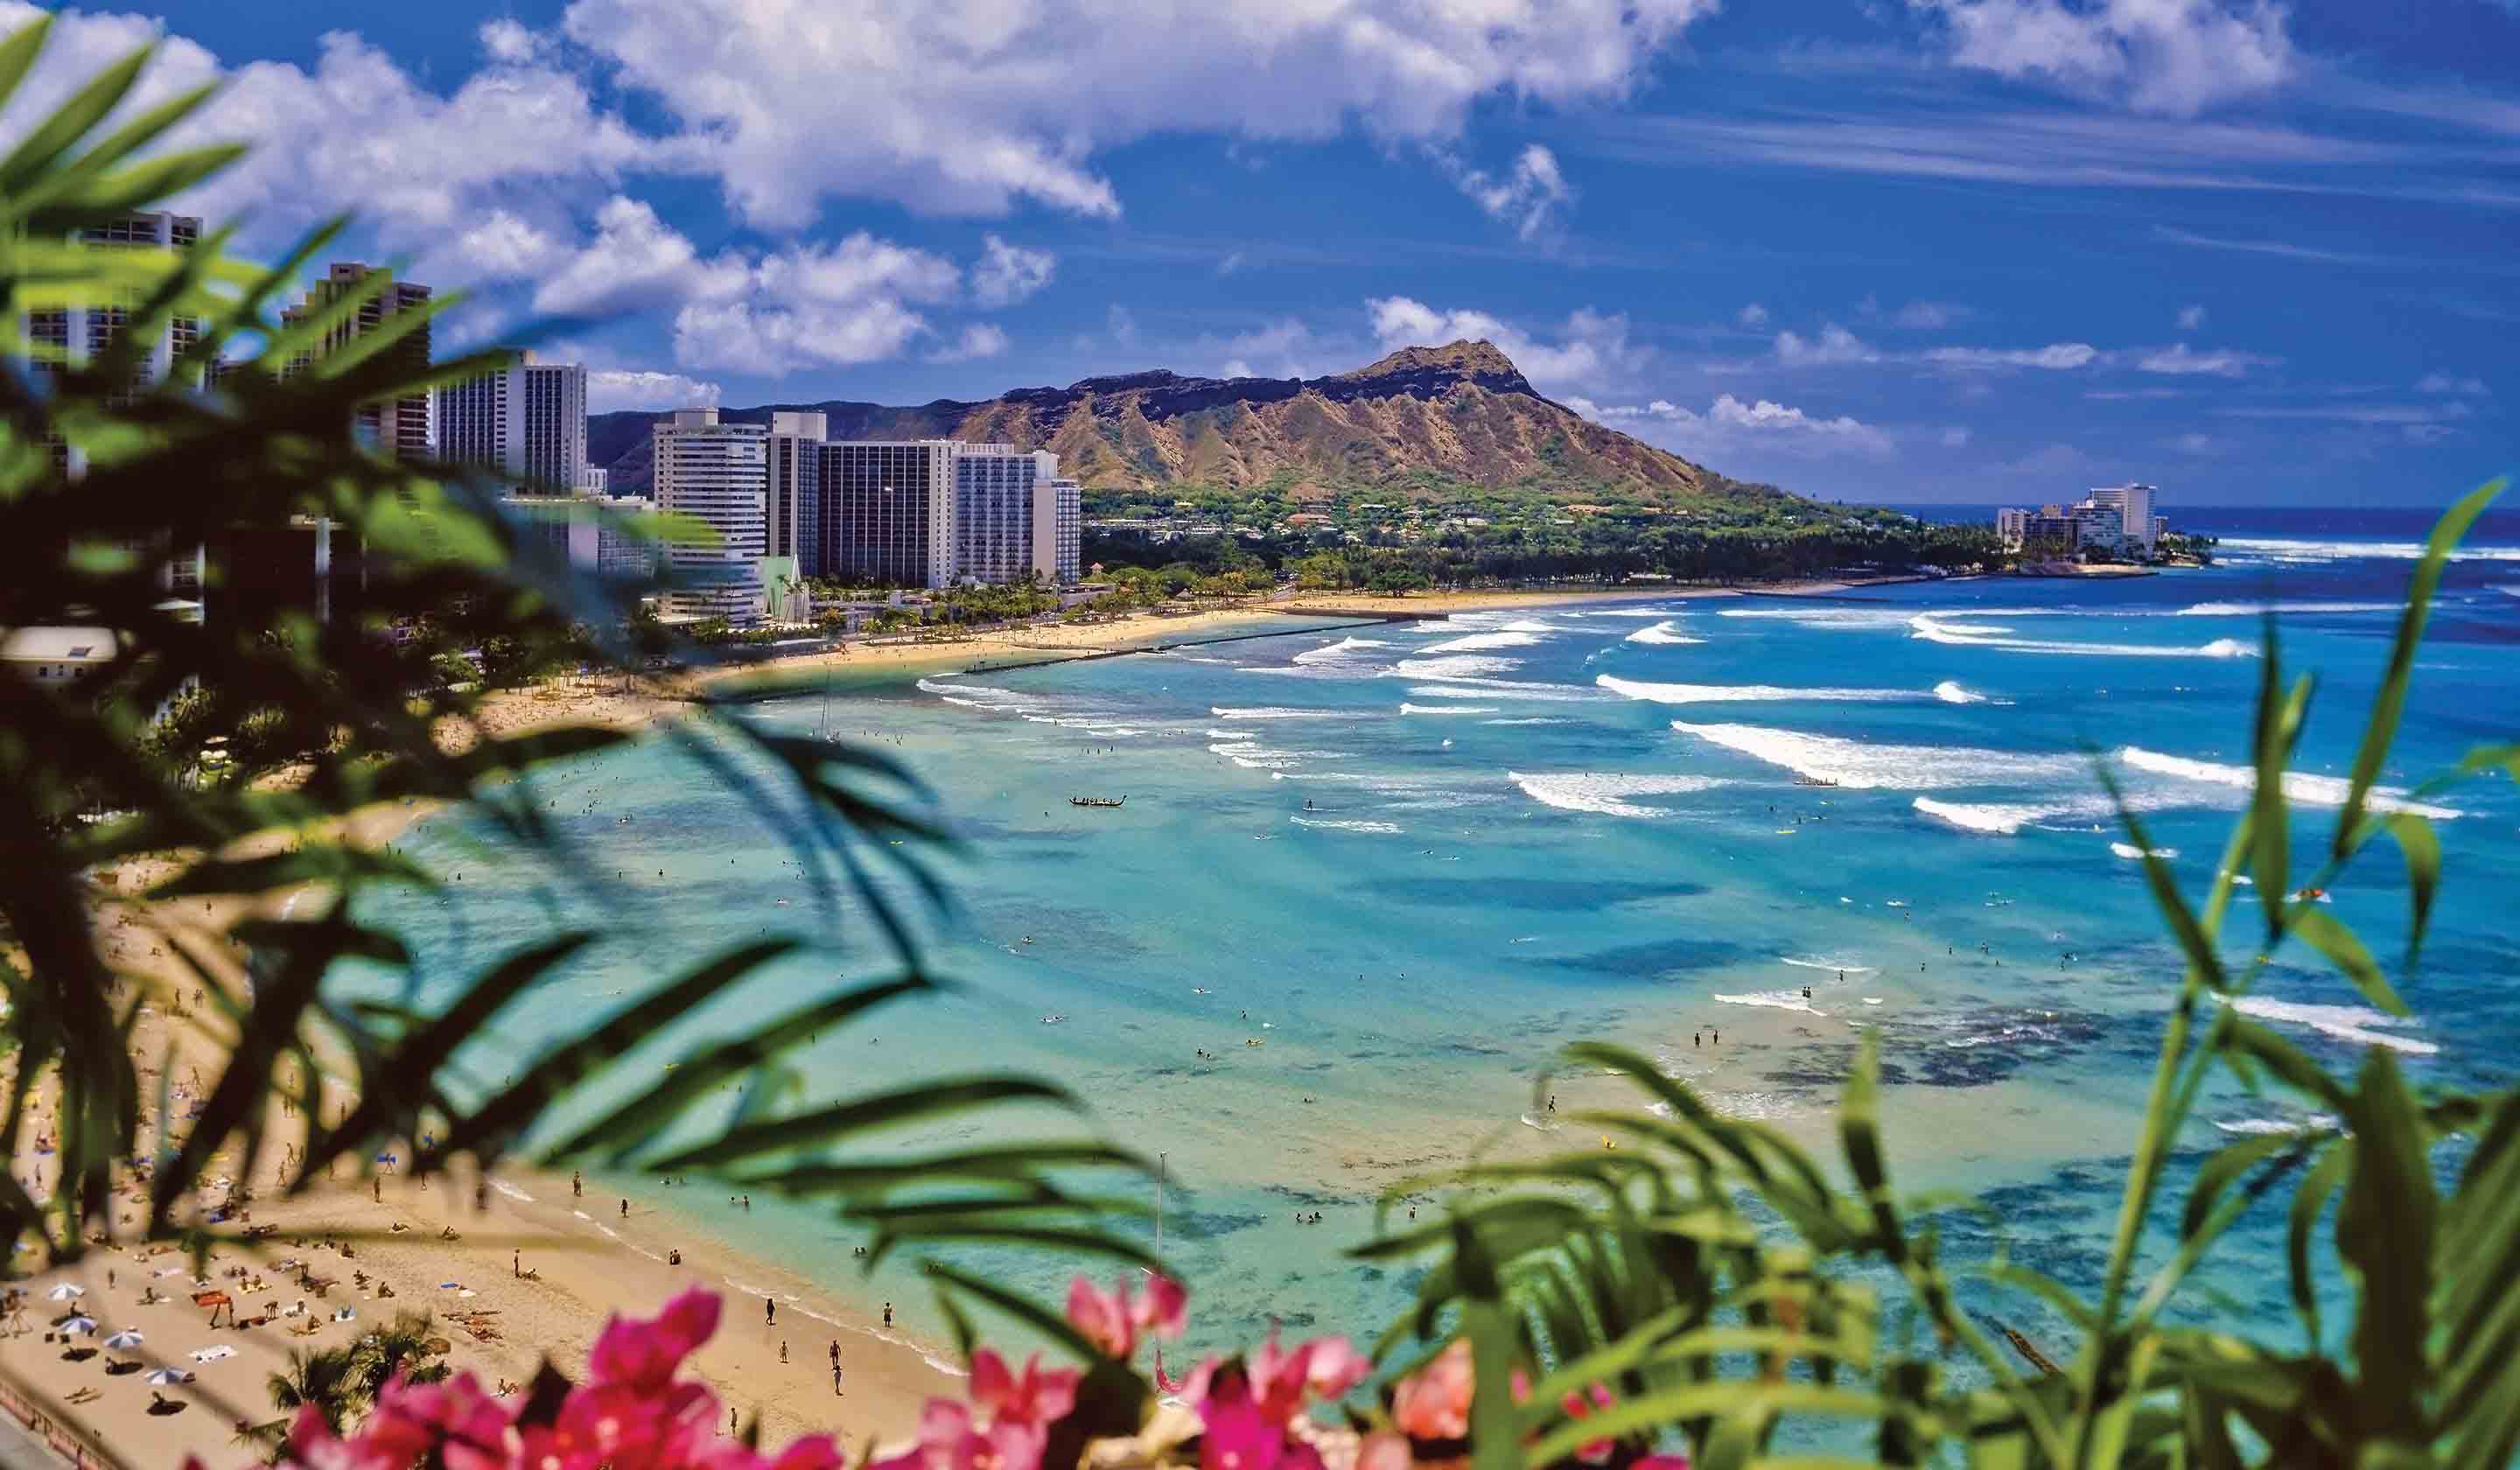 ></center></p><p>12 Days Starting in Honolulu, Hawaii, USA and ending in Maui, Hawaii, USA</p><p>Visiting: Honolulu, O‘ahu, Island of Hawai'i, Hawaiʻi Volcanoes National Park, Kauai, Maui</p><h2>Tour operator:</h2><p>Recommended for:.</p><p>50 plus , Couples , Family-Kids</p><h2>Guide Type:</h2><p>Fully Guided</p><h2>Physical rating:</h2><p>Medium, Activity 2 / Pace 1</p><h2>Trip Styles:</h2><p>Active , Adventure Tours , Luxury , Walking Hiking and Trekking</p><p>Beach Tours , Cultural , History</p><h2>Activities:</h2><p>Sightseeing , Walking</p><p>Tourhub Members Discount - Sign In</p><p>NB: Prices correct on 06-Jul-2024 but subject to change.</p><h2>This tour is no longer available, please see similar tours below or send an enquiry</h2><p>Tour overview.</p><p>Tauck’s classic four-island journey across Hawaii incorporates natural and historical sights, exclusive cultural experiences, and free days to pursue your own passions on Oahu, the Big Island of Hawaii, Kauai and Maui. Stay in ocean-view rooms at some of Hawaii's finest oceanfront resorts; have a hands-on gourmet cooking experience at a renowned restaurant on Maui; experience one of the most poignant chapters of World War II history at the USS Arizona Memorial in Pearl Harbor; take a private catamaran sail at sunset on the Big Island; hear a 